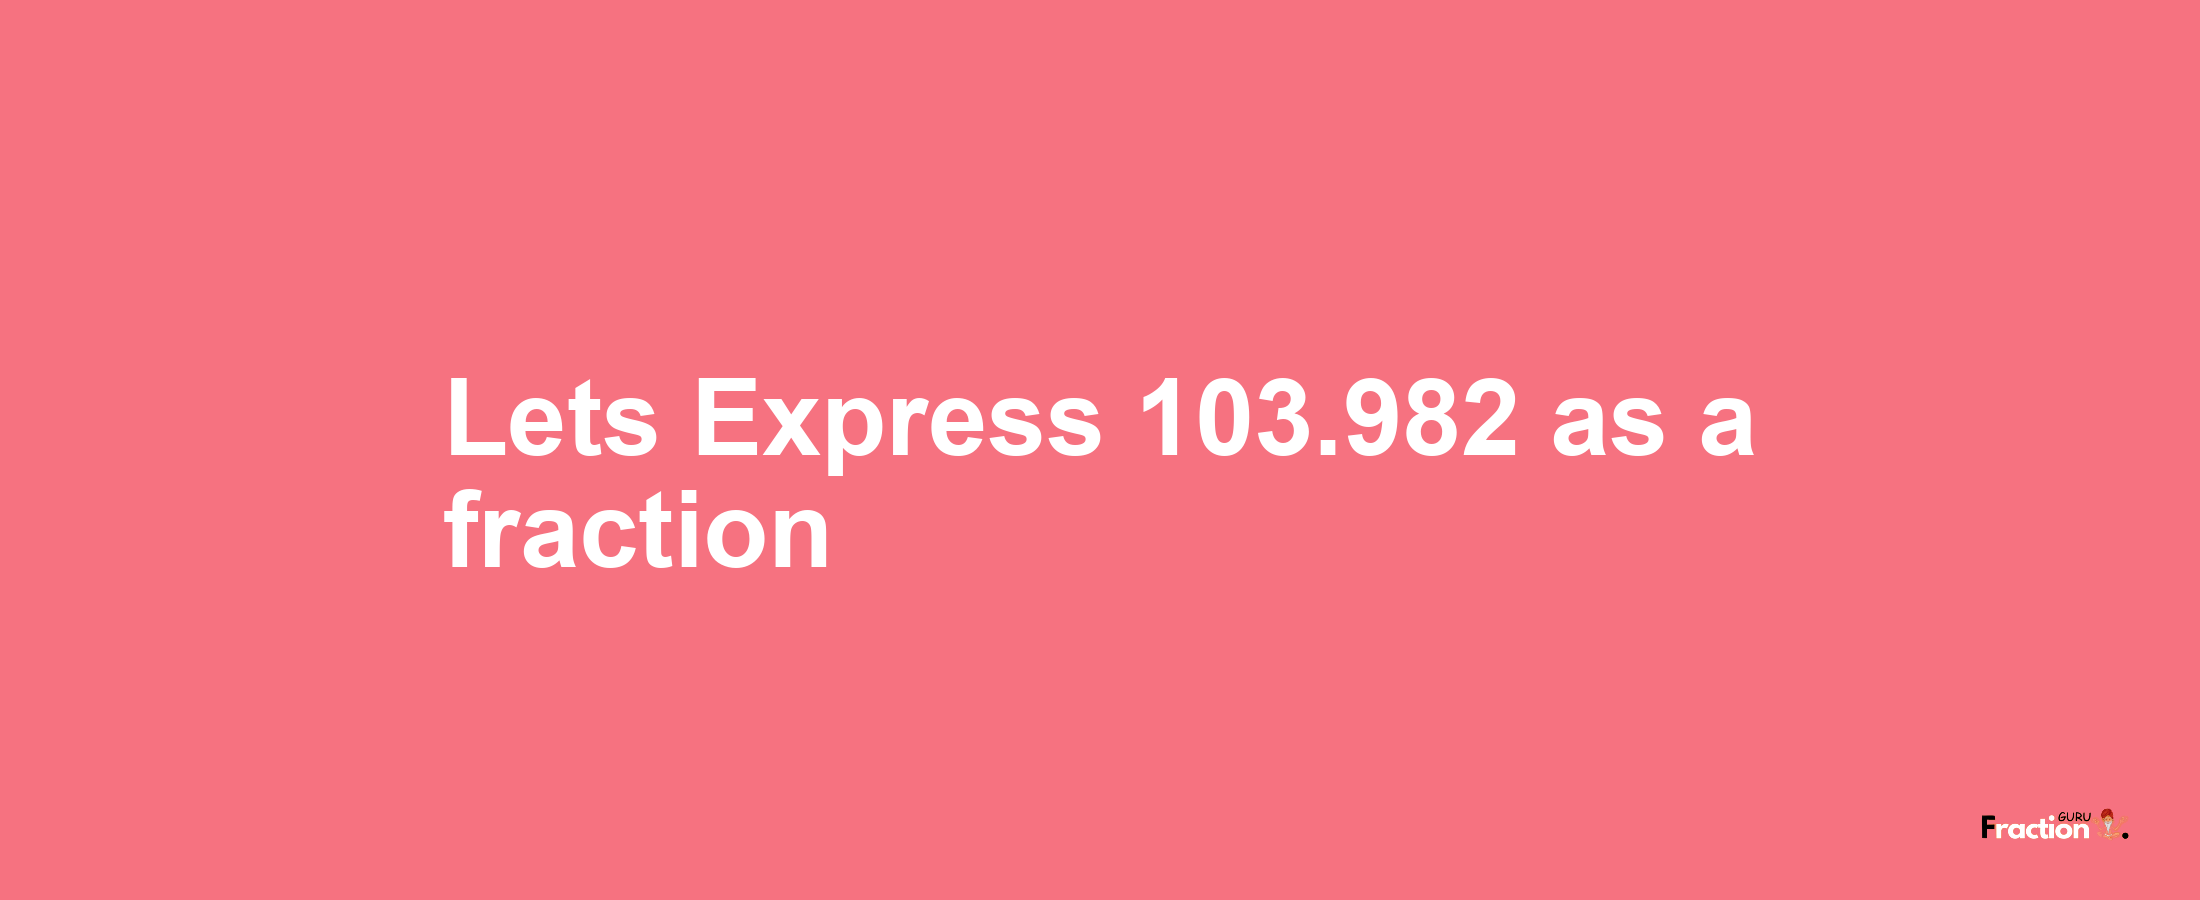 Lets Express 103.982 as afraction